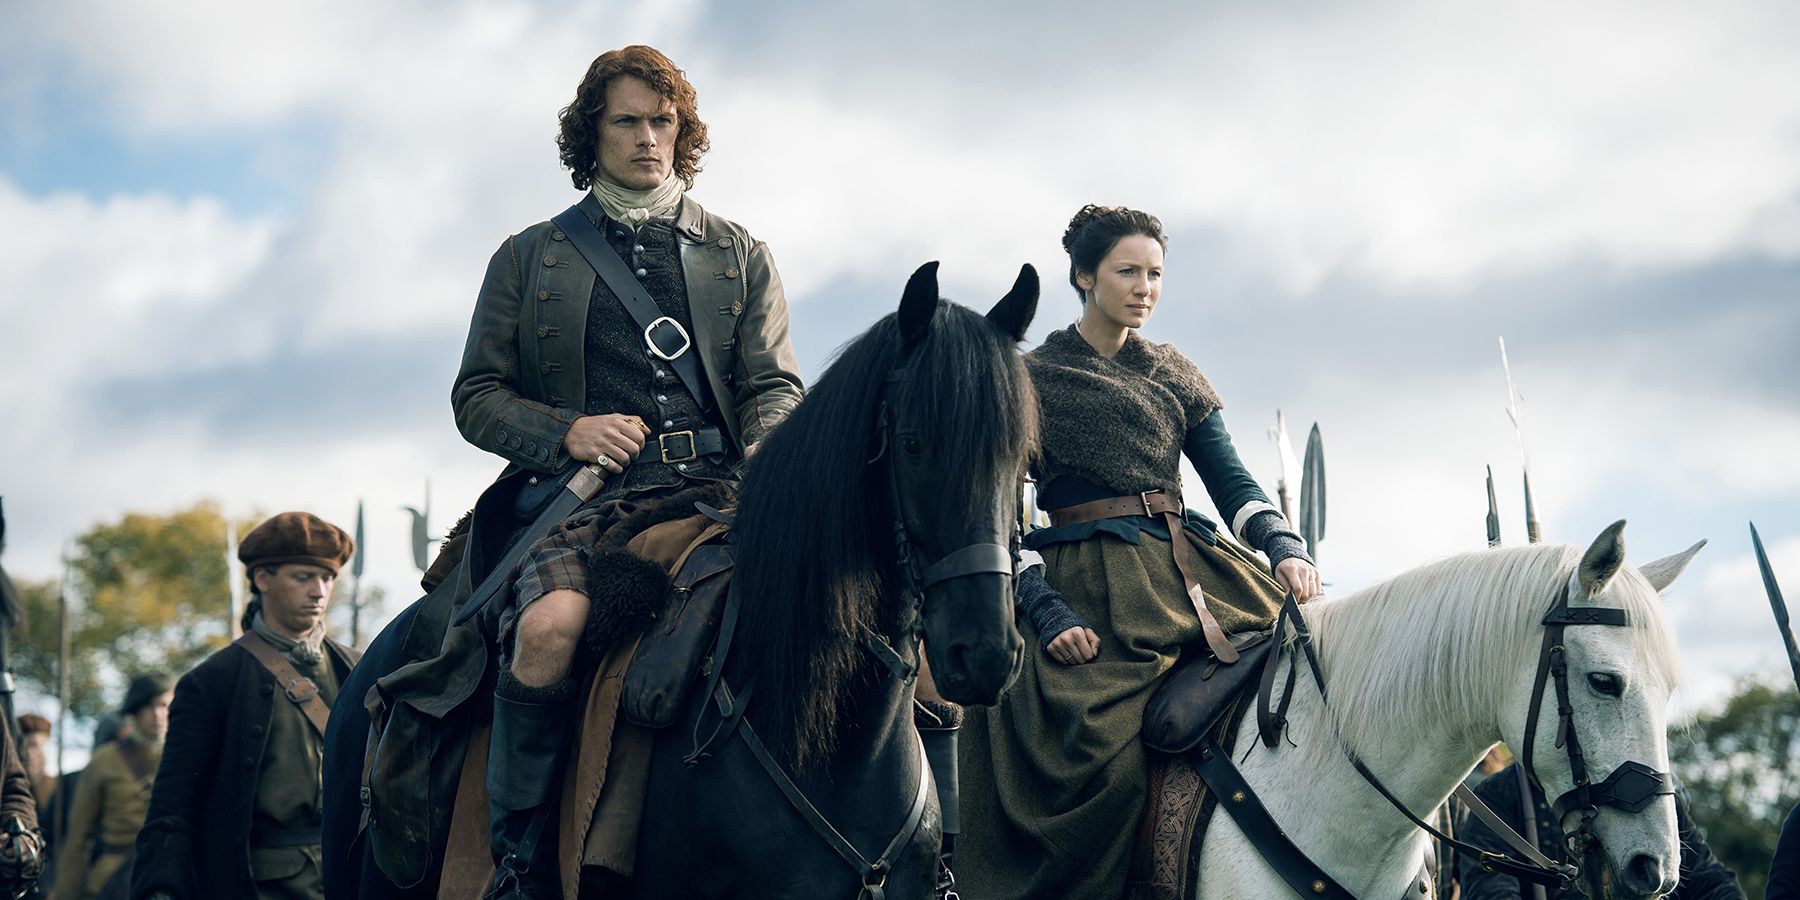 Jamie Fraser and Claire riding horses side by side.